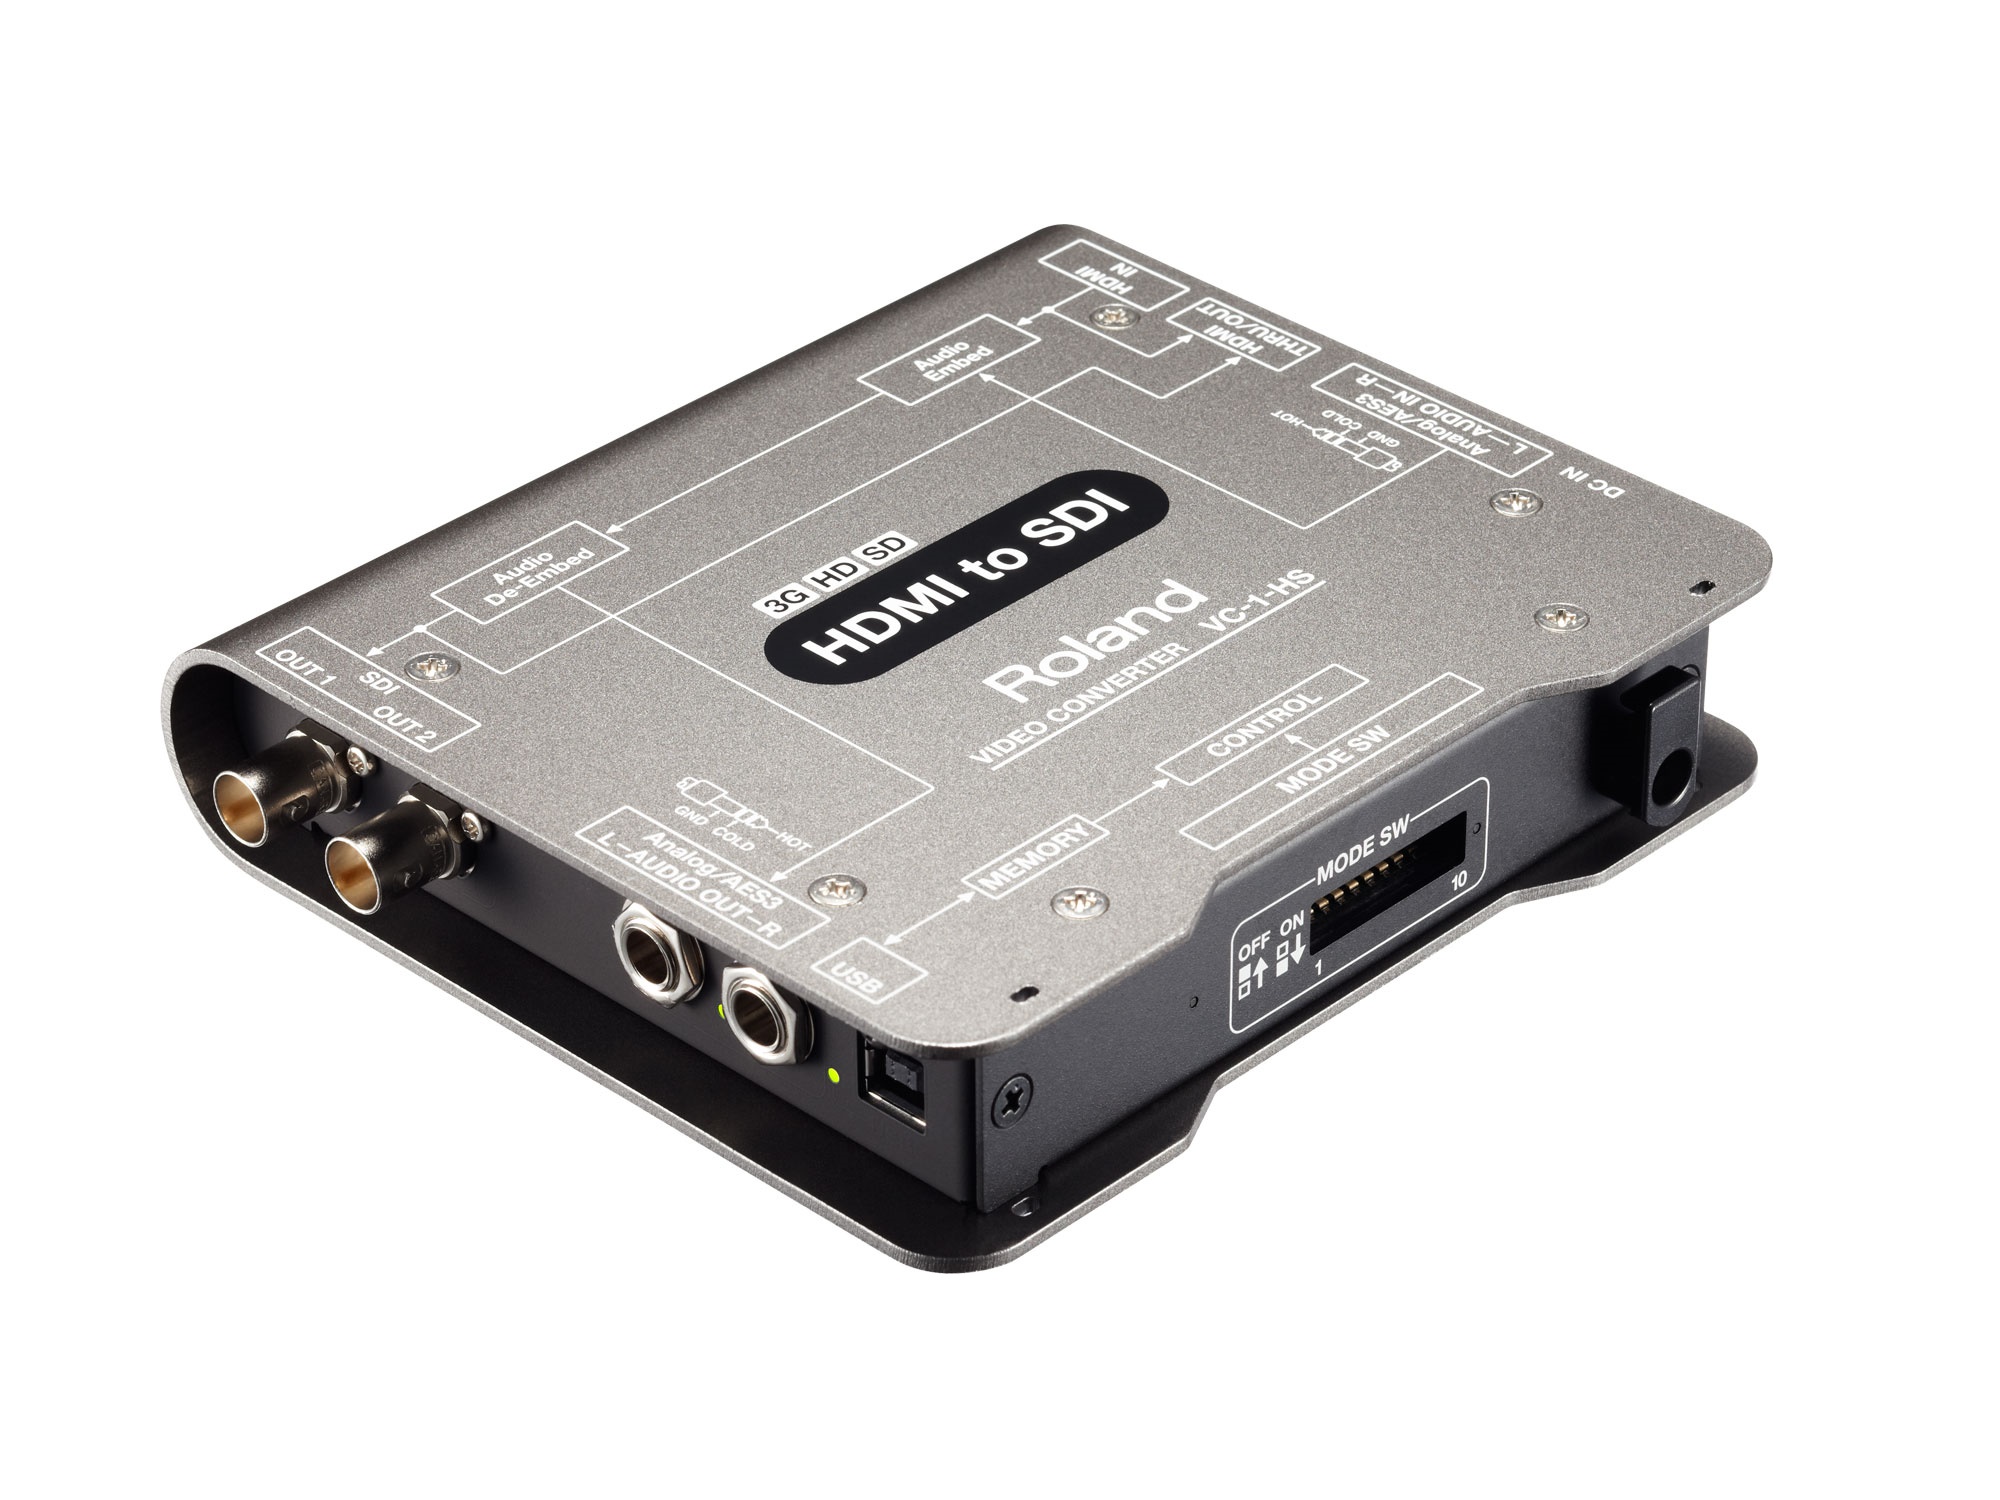 VC-1-HS HDMI to SDI Video Converter by Roland